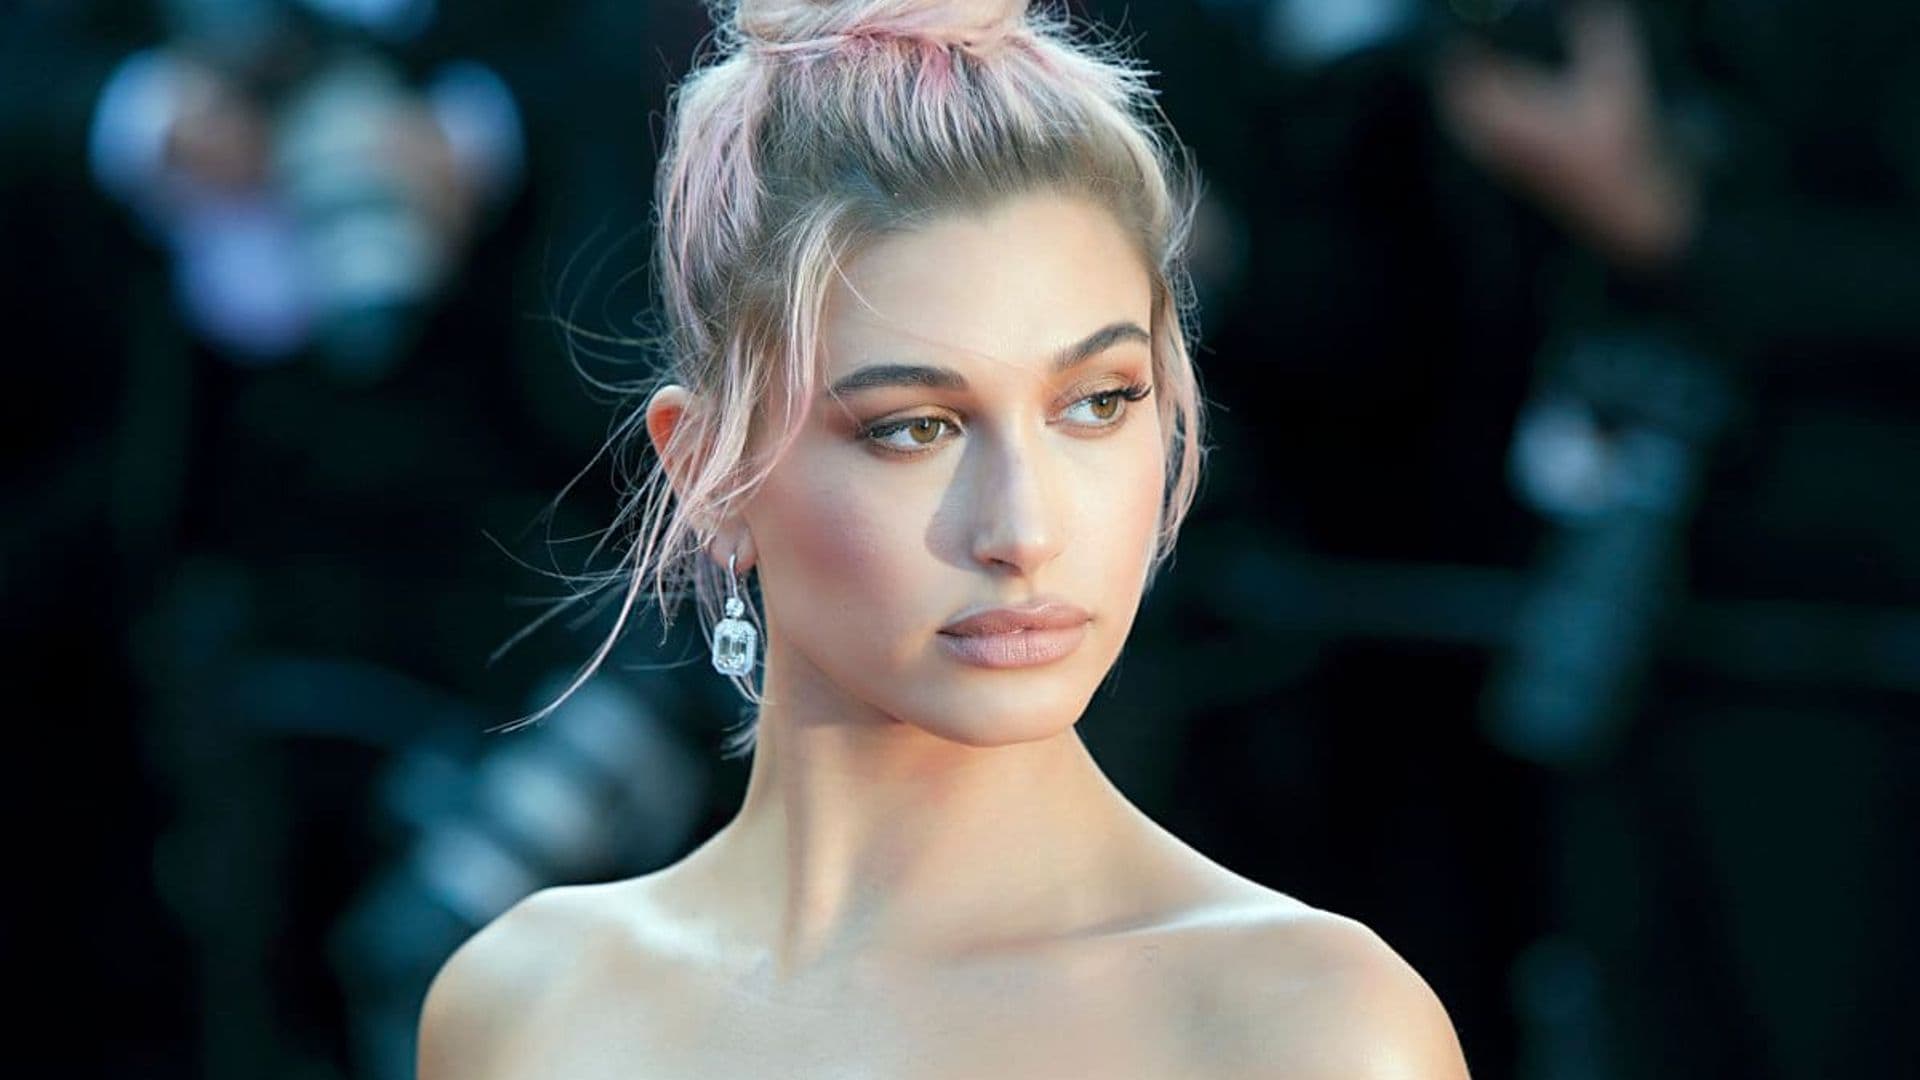 Hailey Bieber is ready to start her new beauty business!